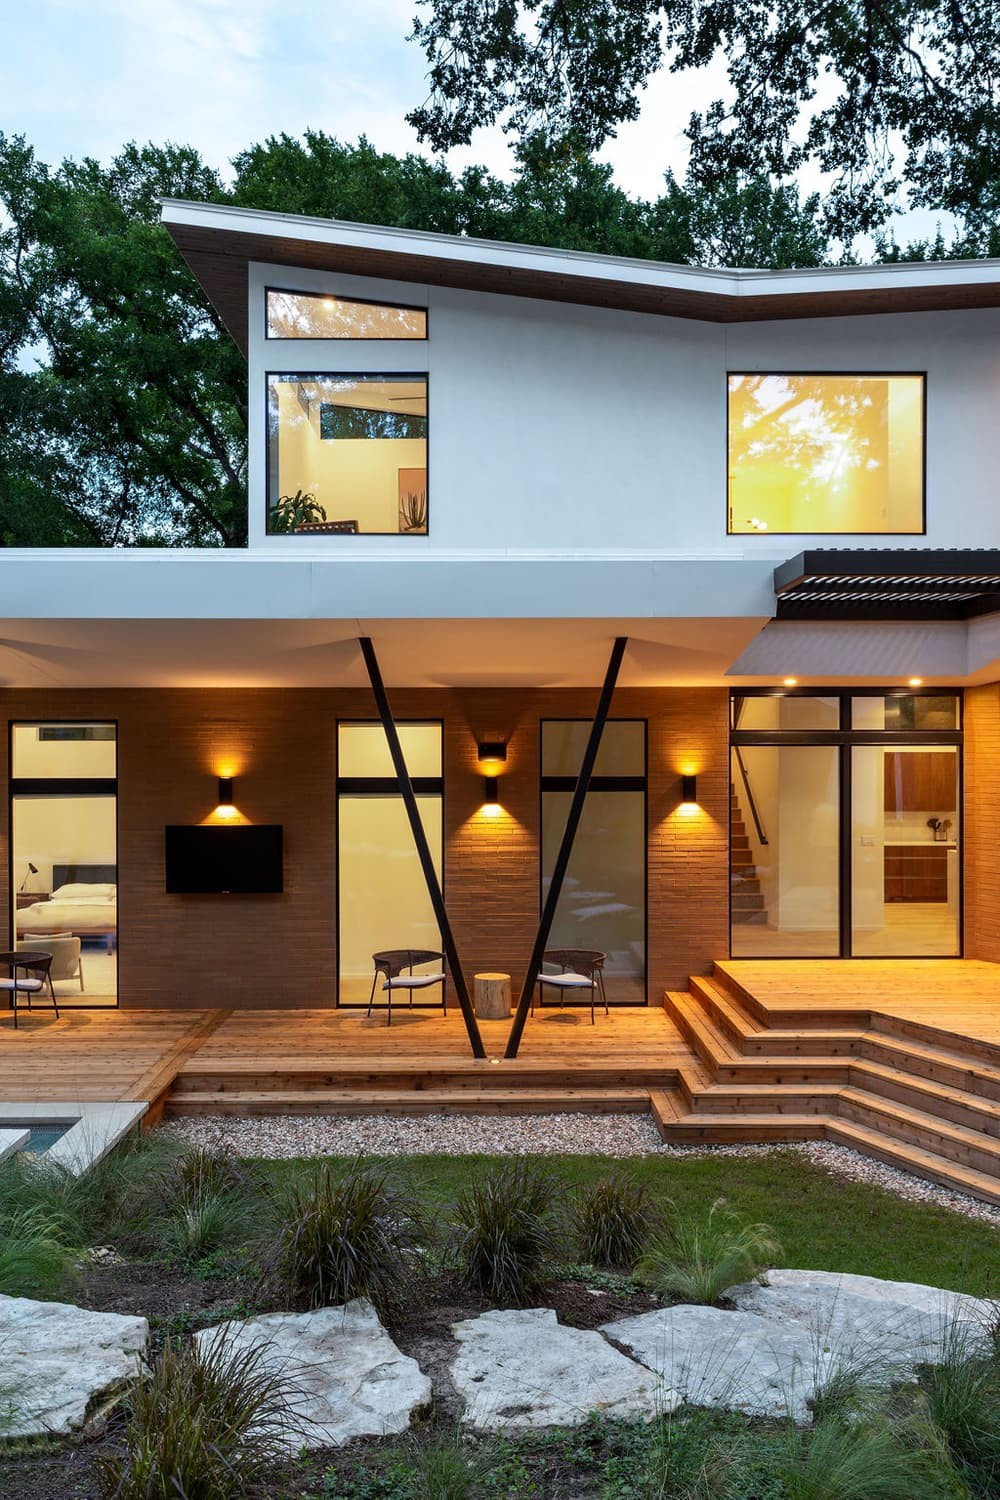 Inverse House by Coxist Studio